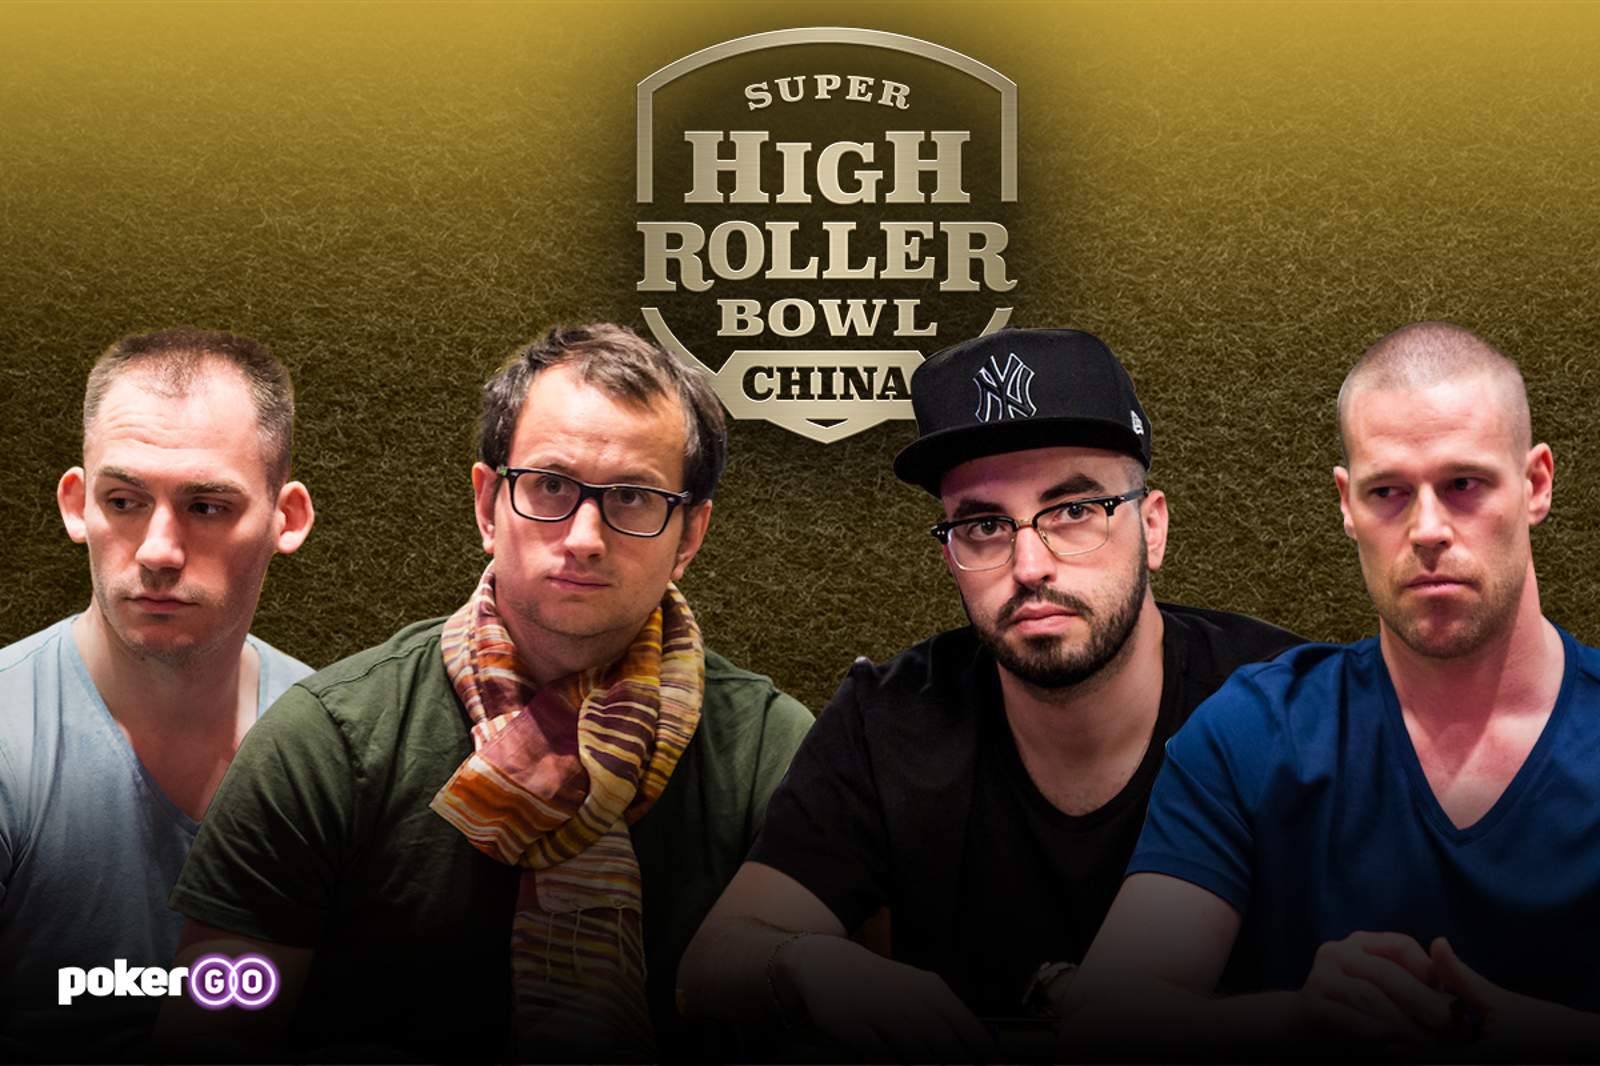 Super High Roller Bowl China Concludes on PokerGO